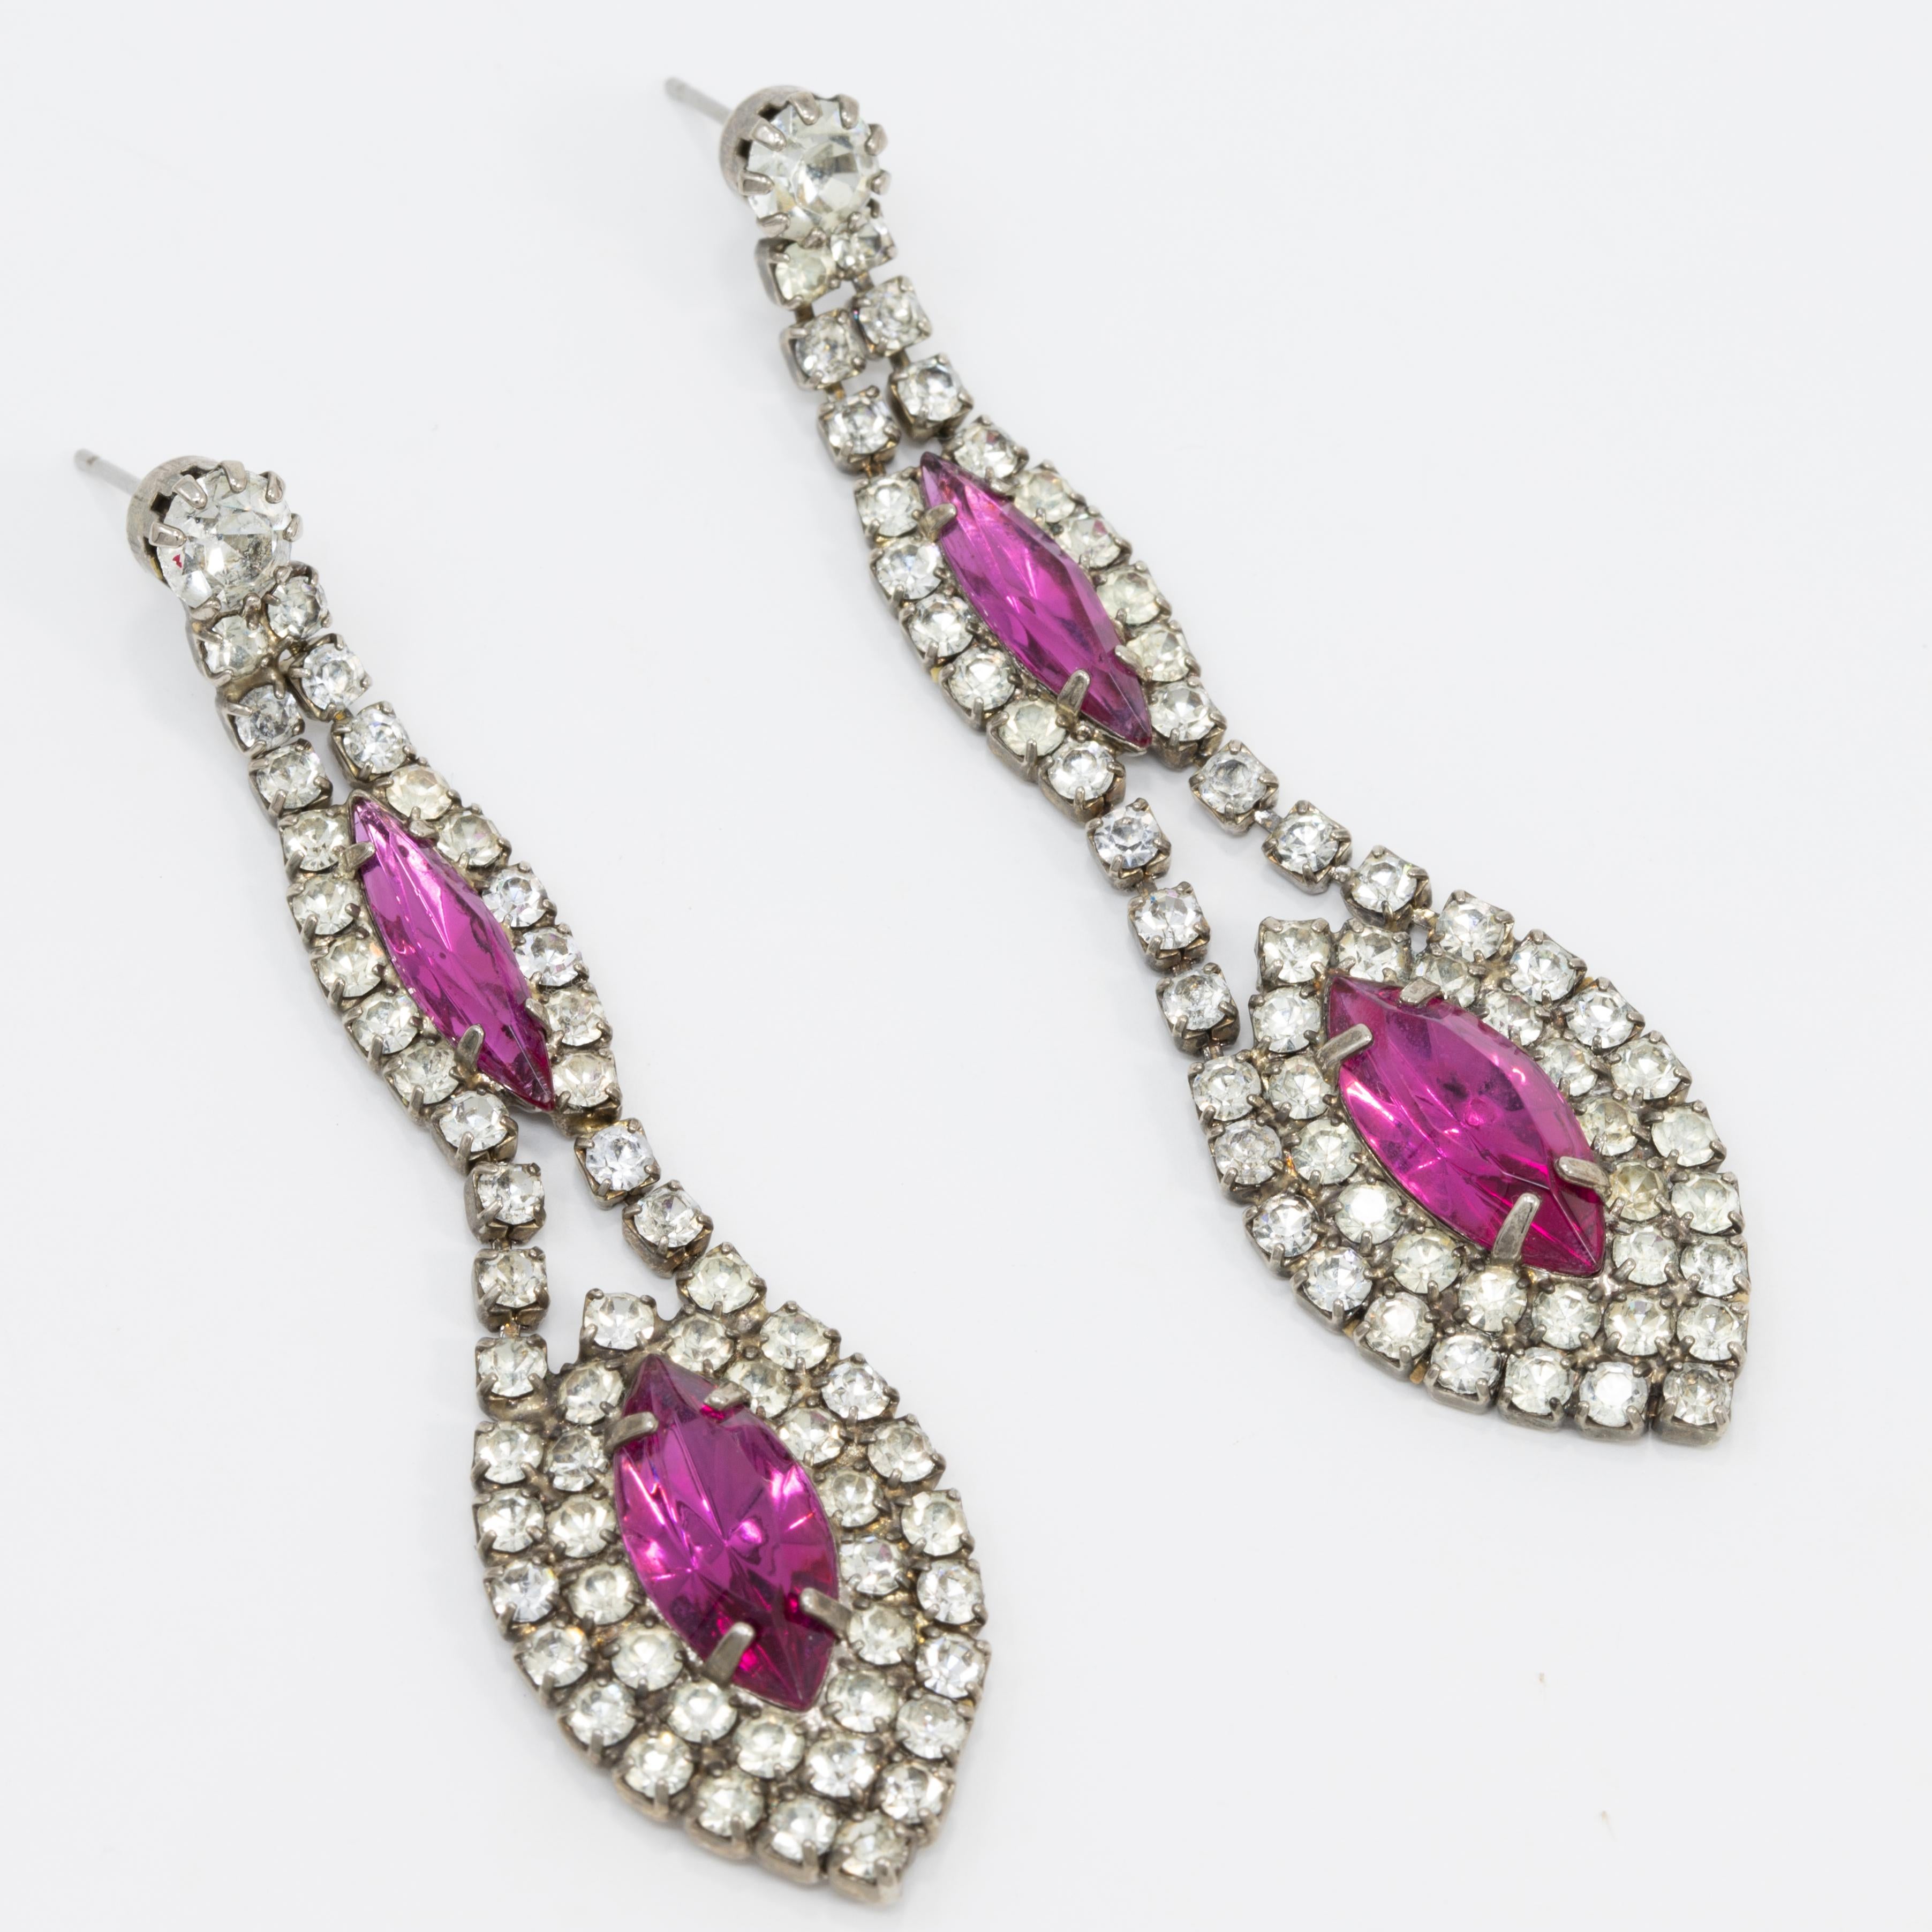 A pair of gleaming vintage drop earrings! Prong-set amethyst crystals accented with clear crystals.

Post backs. Mid 1900s.